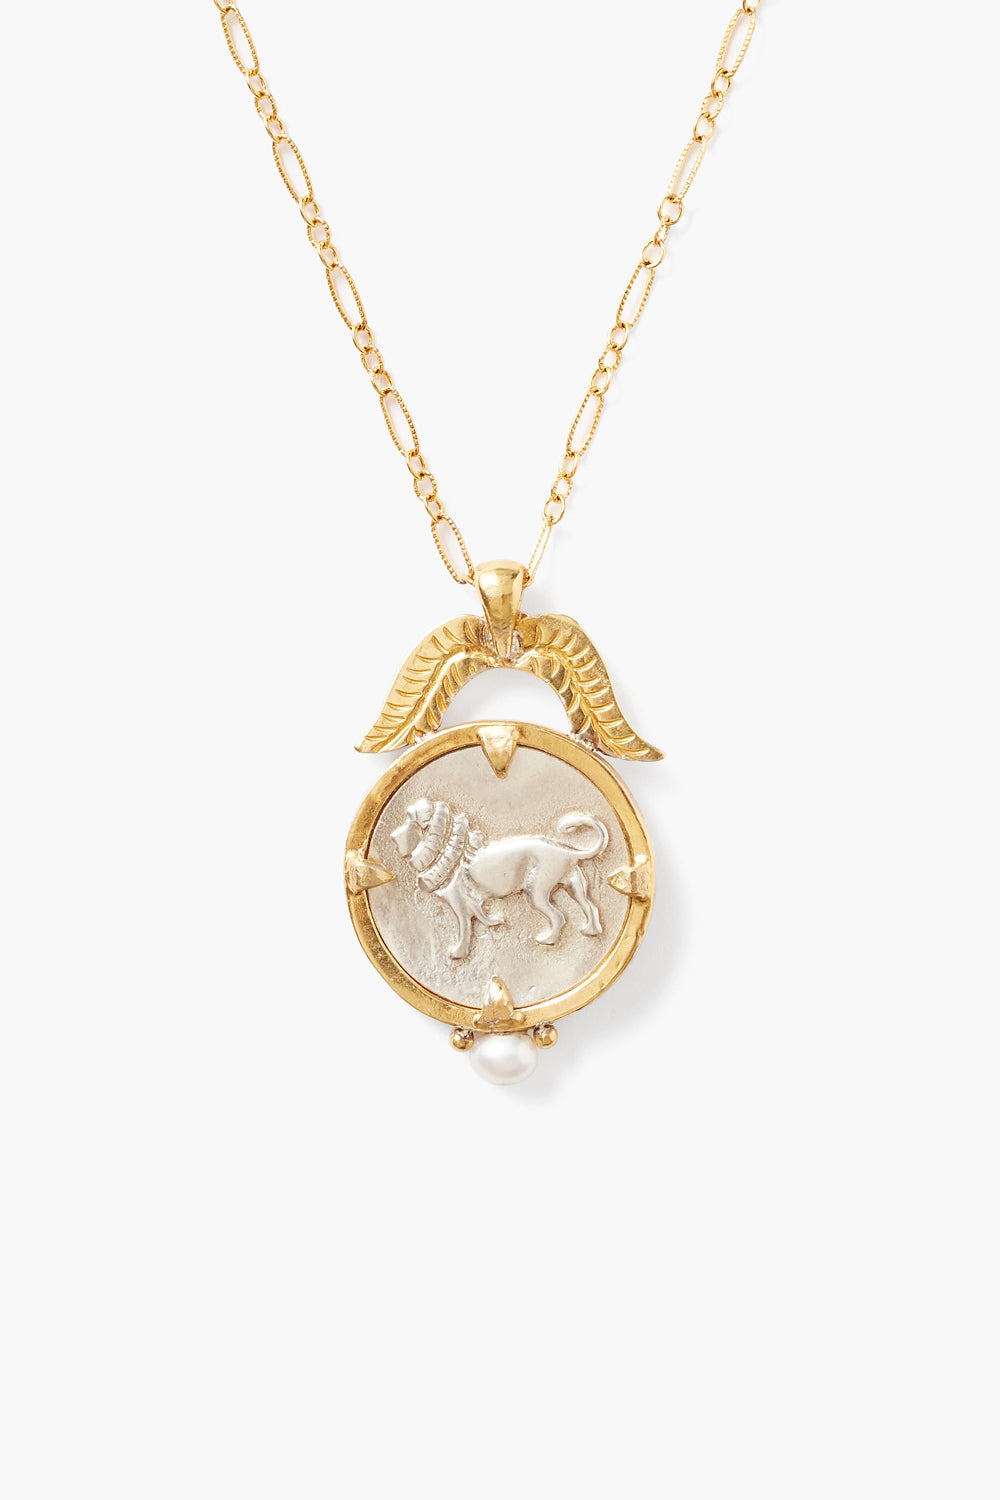 YELLOW GOLD MIX ADJUSTABLE LION COIN CHAIN NECKLACE - Kingfisher Road - Online Boutique